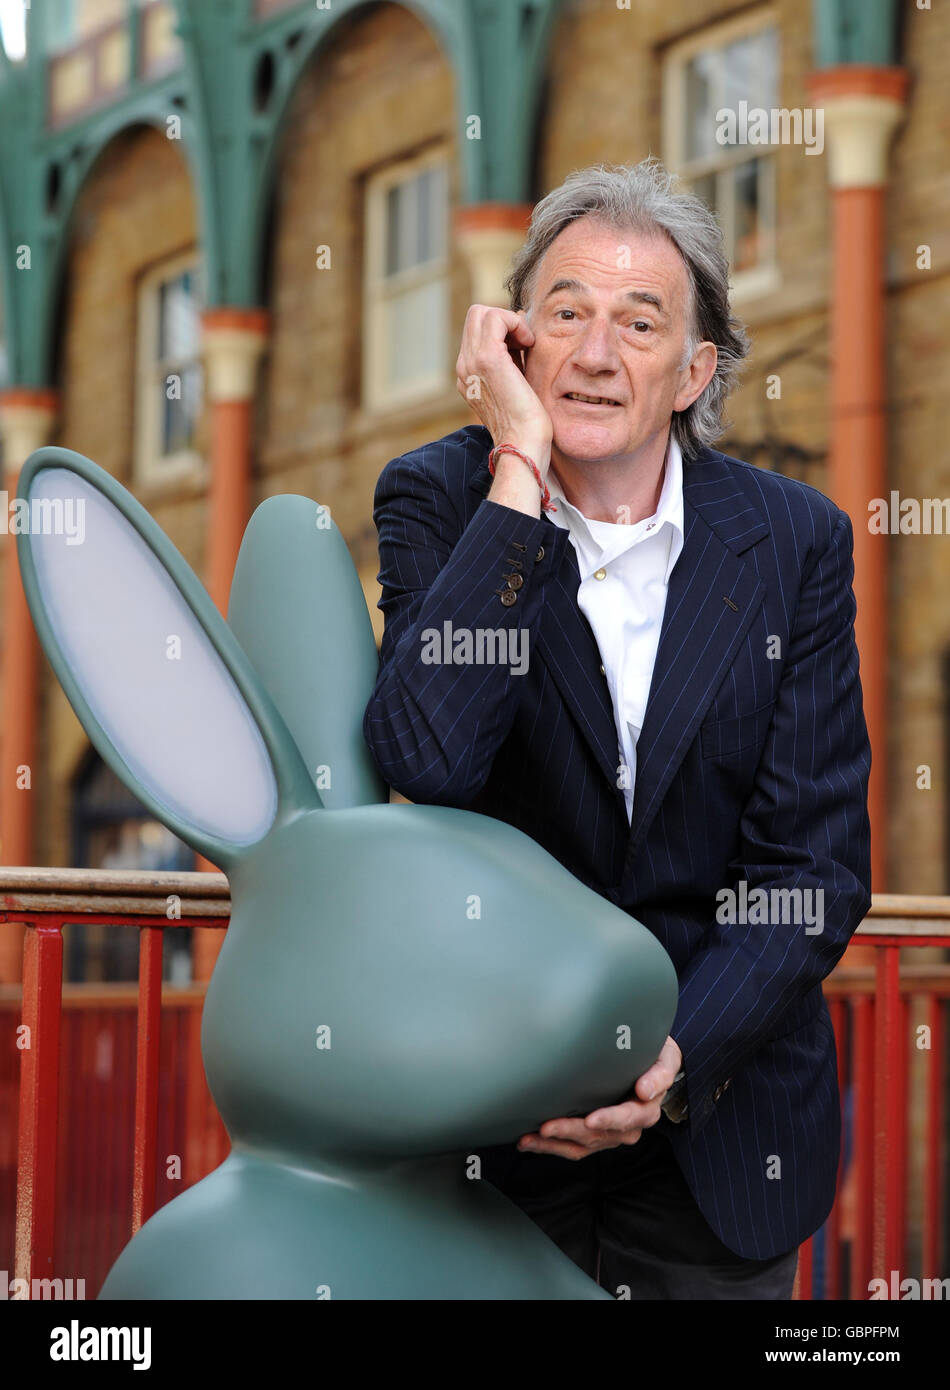 British fashion designer Paul Smith unveils the new London rubbish bin. The  giant rabbit 'Bunny Bin' has ears that light up when anyone puts rubbish  into it in central London Stock Photo -